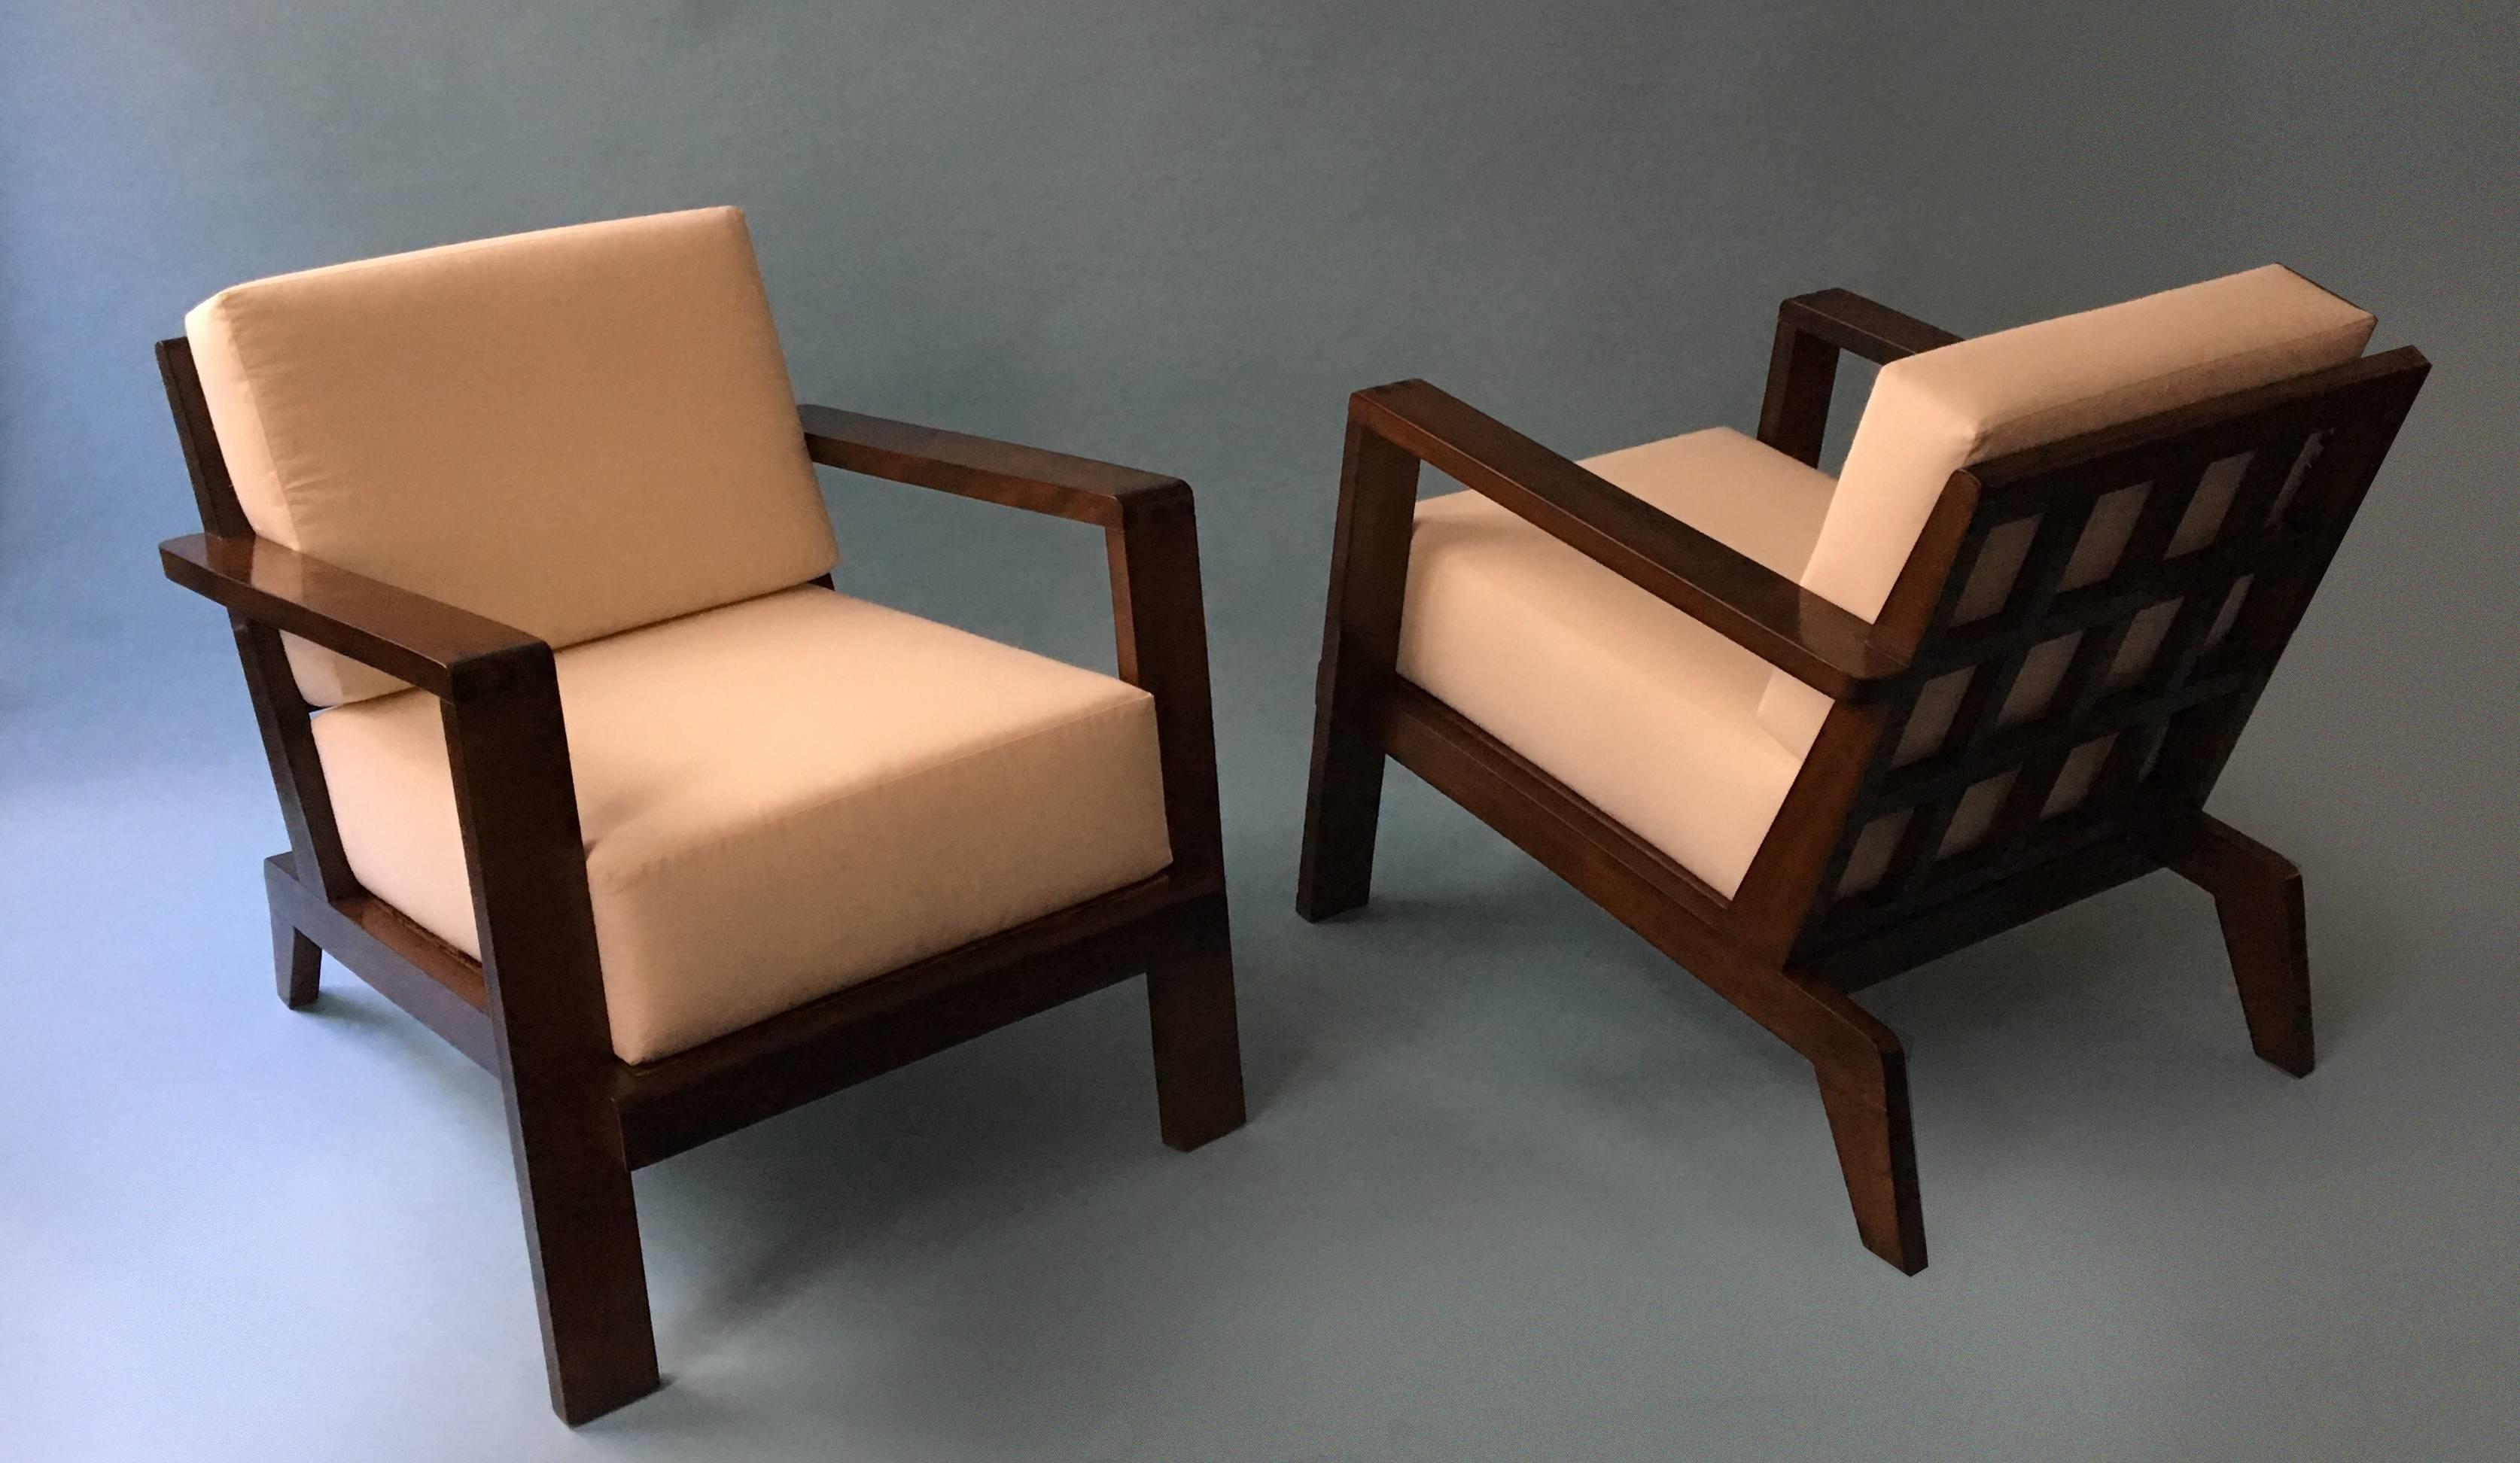 Two different models of this armchair where originally produced. The only difference is in the type of joint used in the front of the seat of the armchair ( one was a 